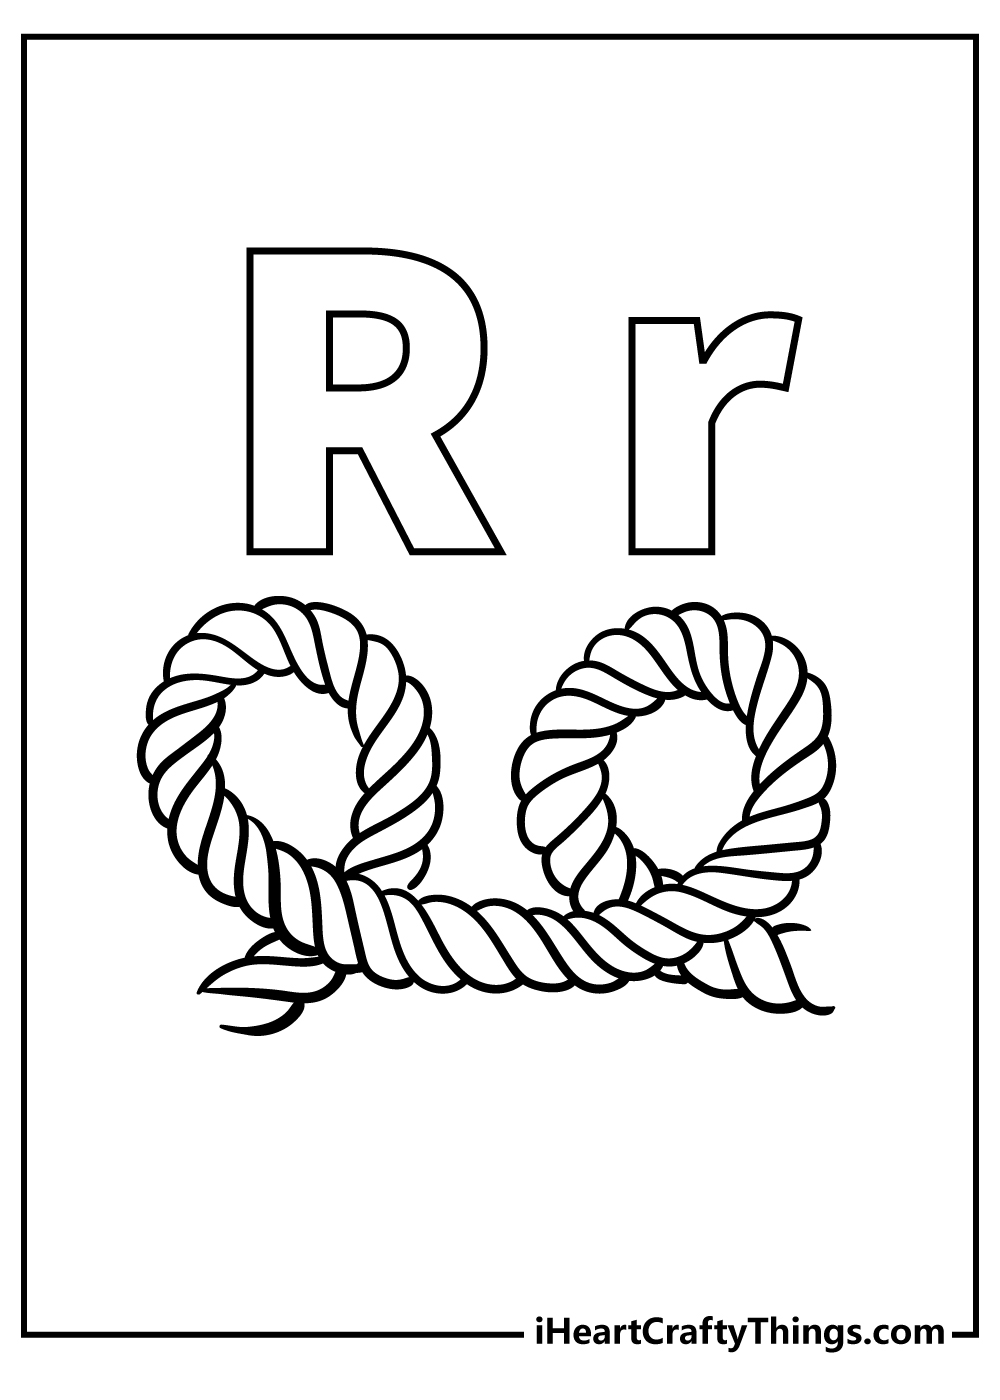 Letter R Coloring Pages for kids free download